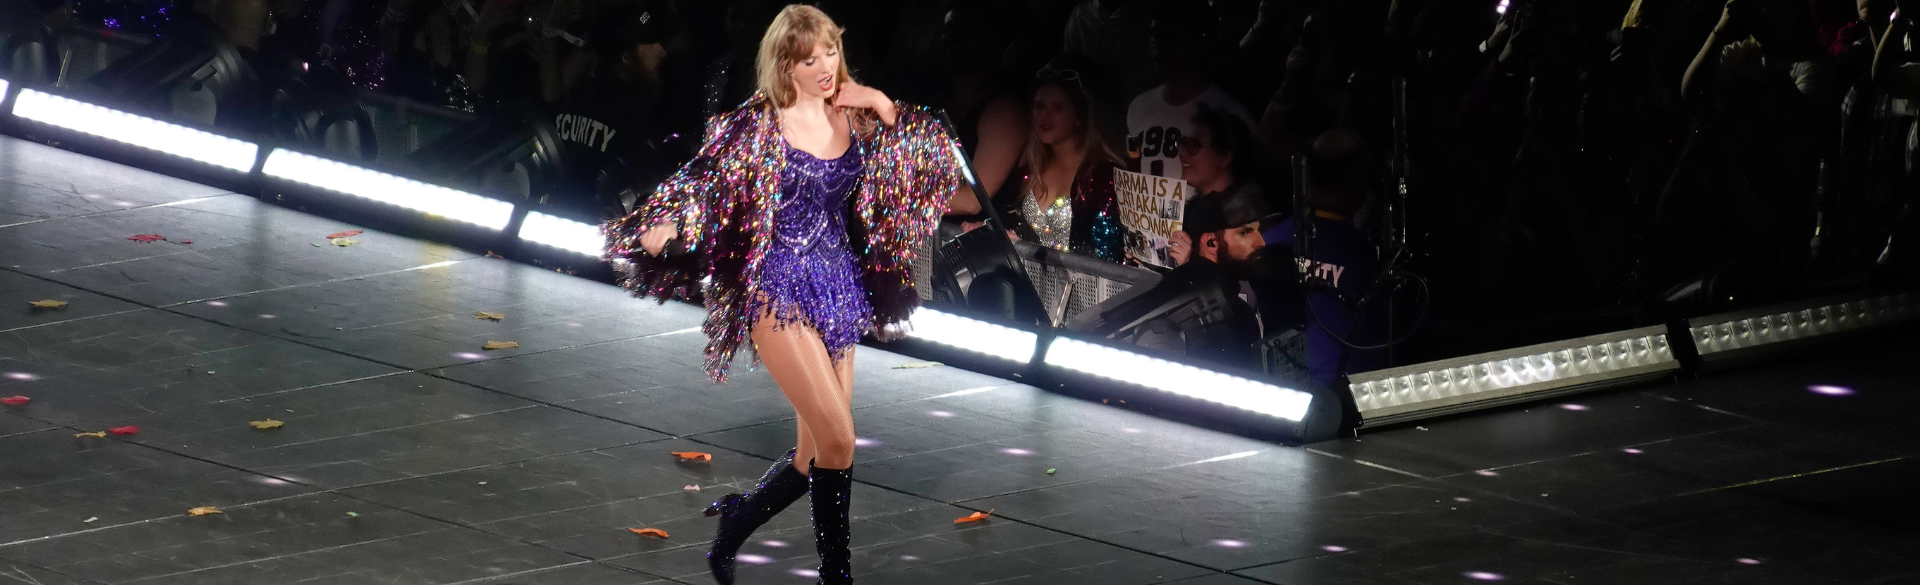 Why Some Swifties Report ‘Concert Amnesia’ After Attending the Eras Tour